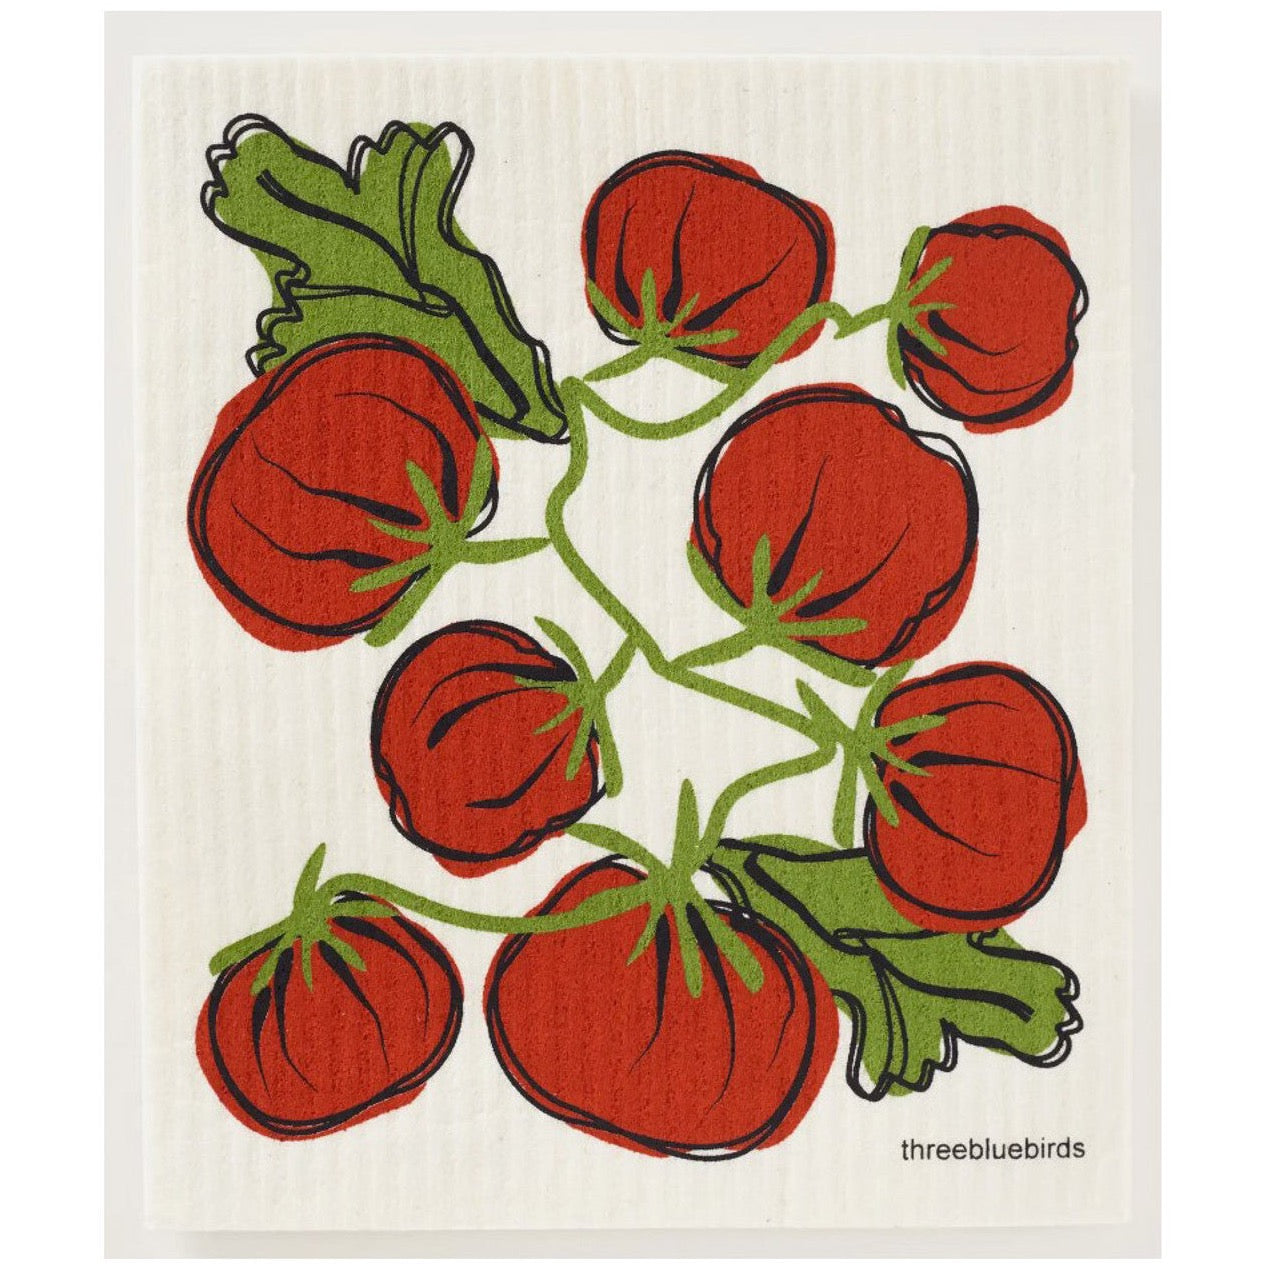 Swedish dishcloth with red tomatoes on a green vine printed on it